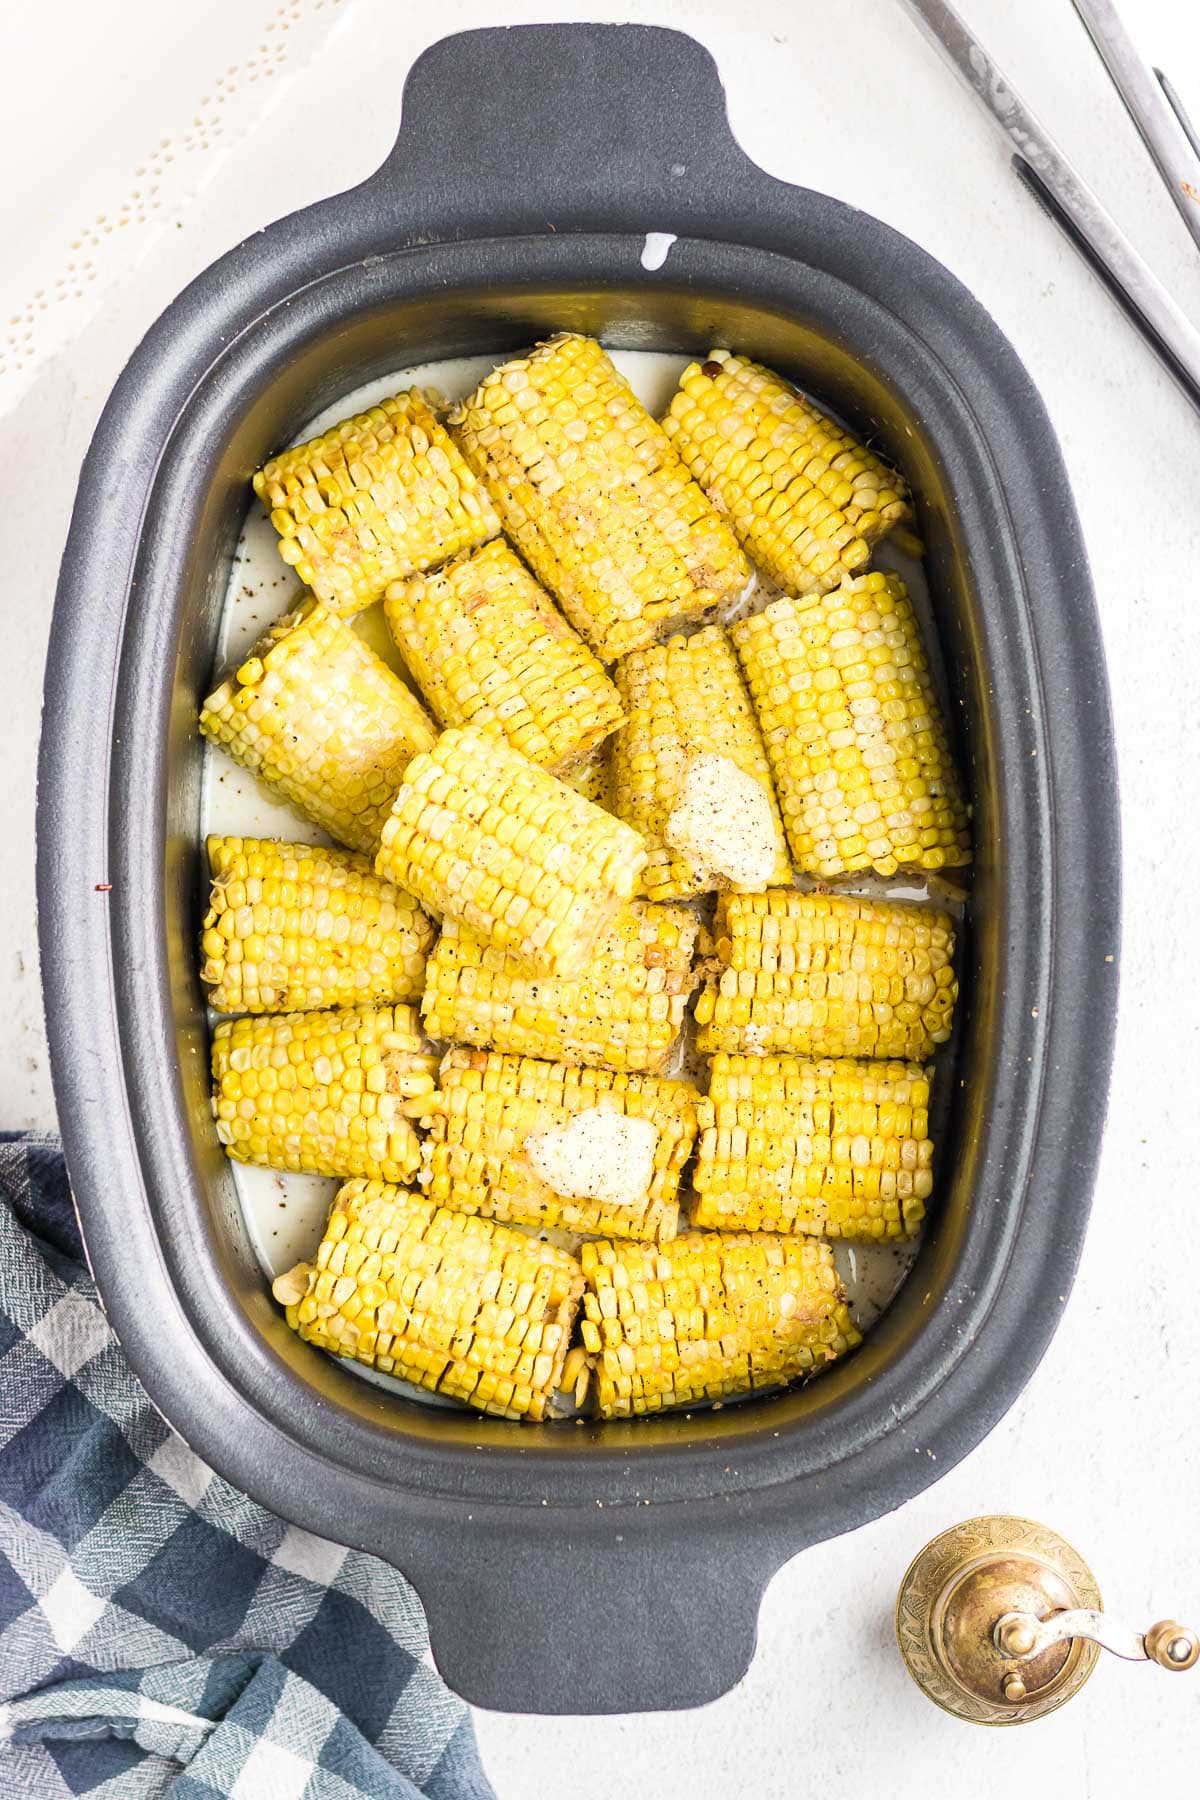 Cooked ears of corn in the slow cooker with butter melting on top.